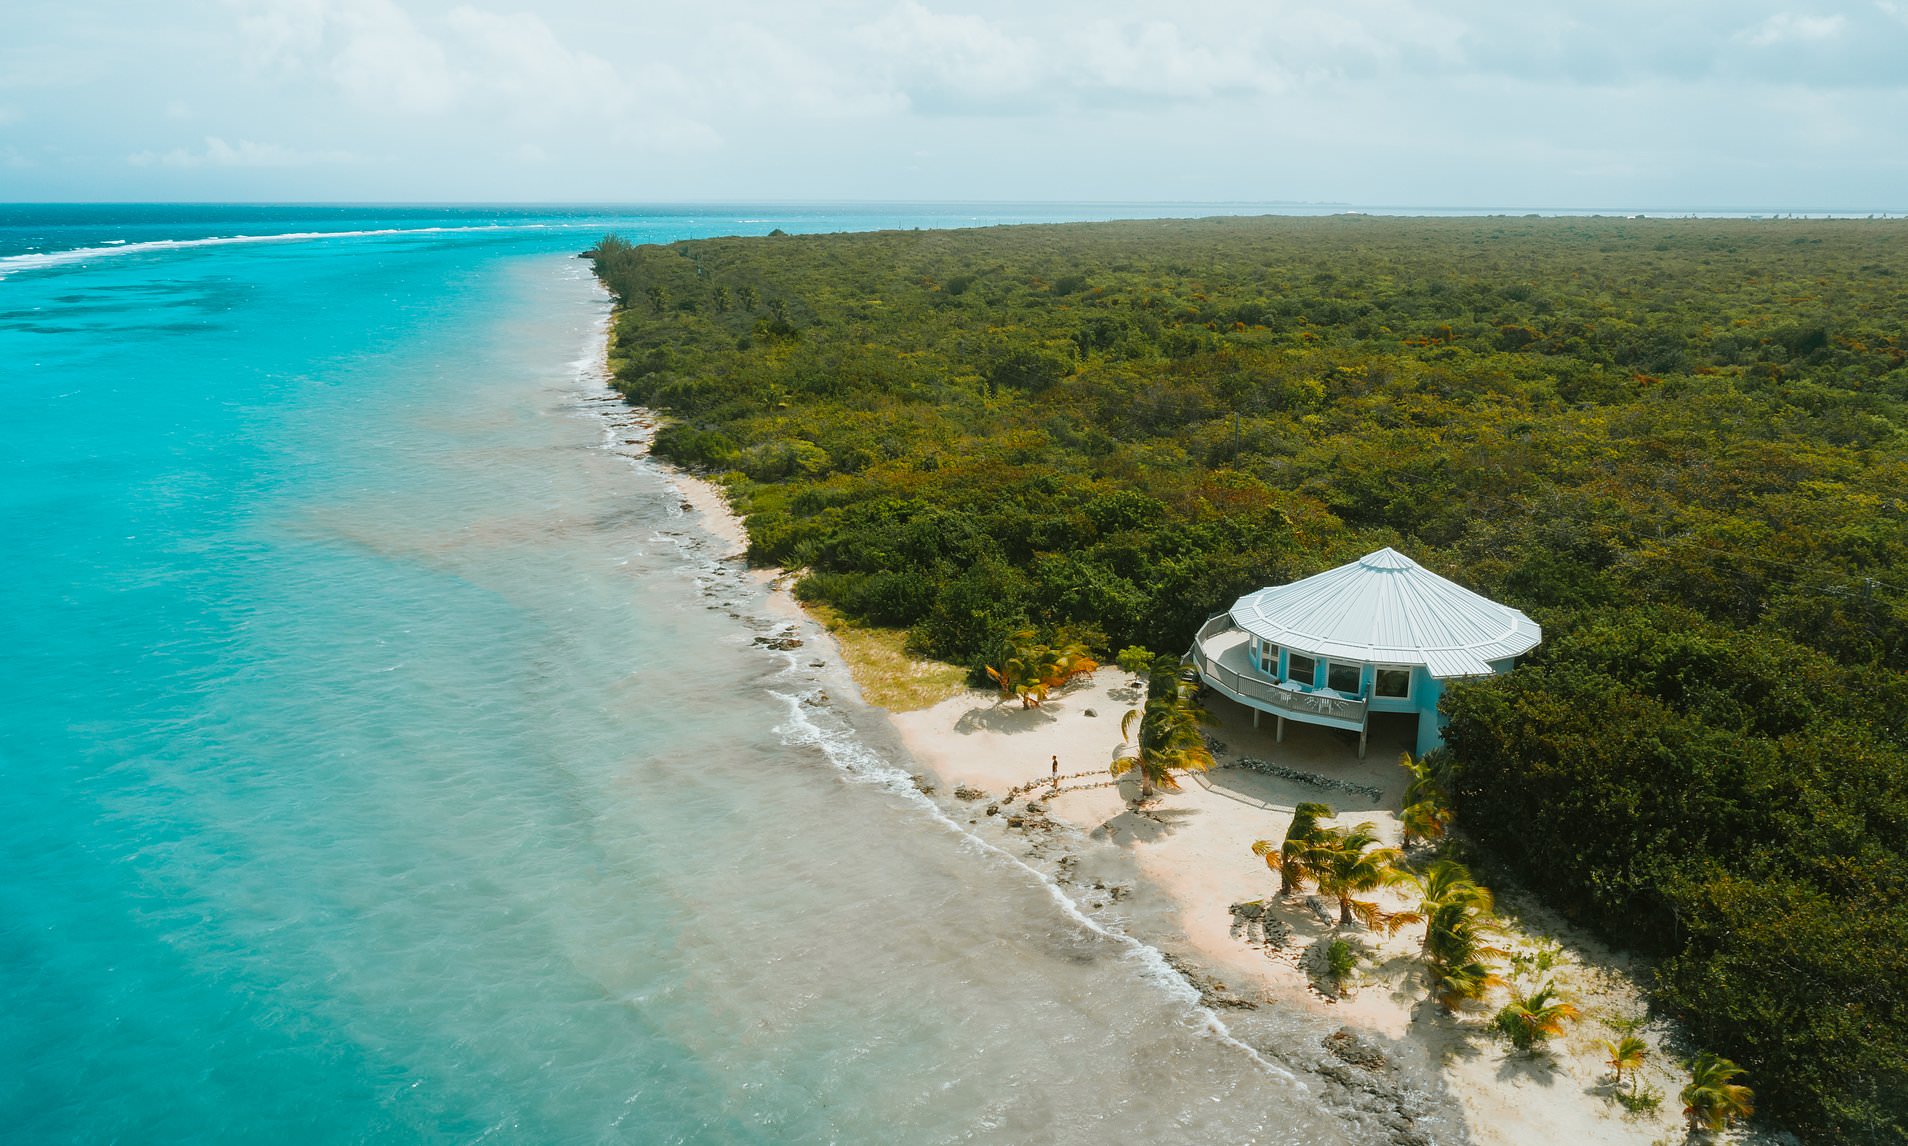 Seek solitude at Little Cayman's Owen Island or Point of Sand